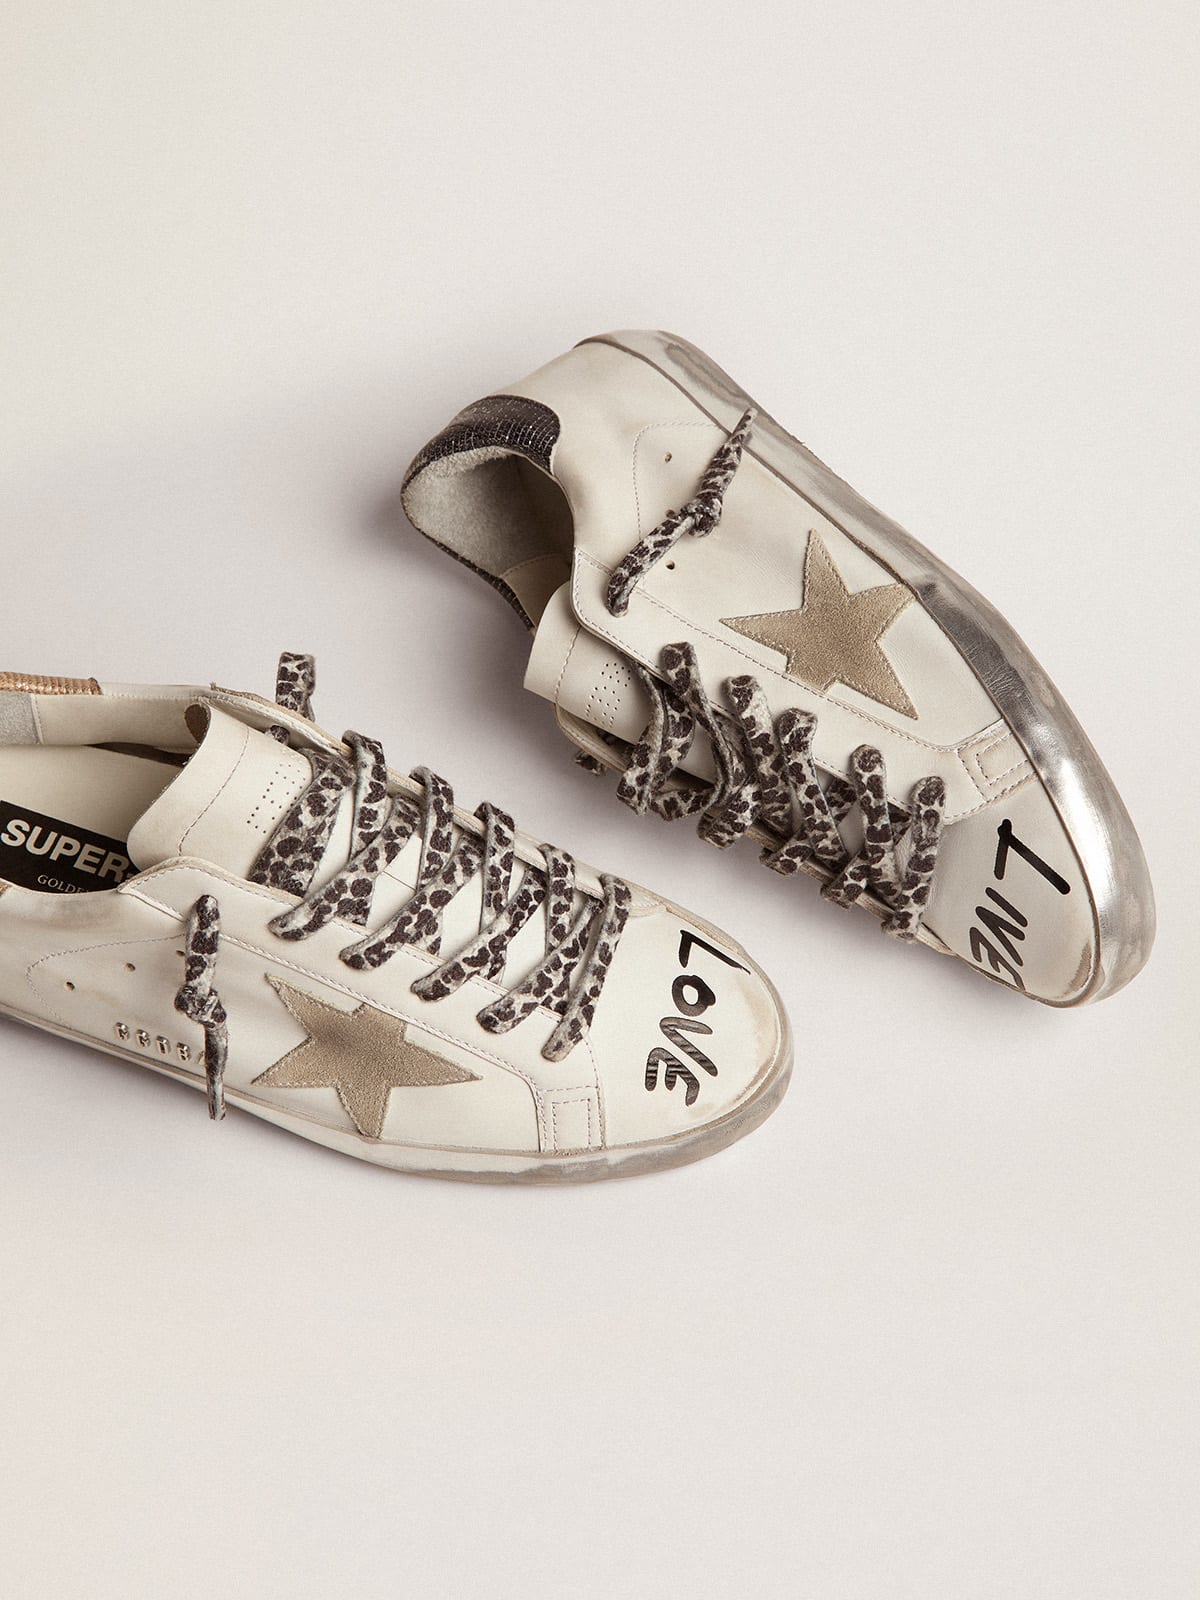 Golden Goose - Super-Star sneakers in white leather with ice-gray suede star and contrasting black lettering in 